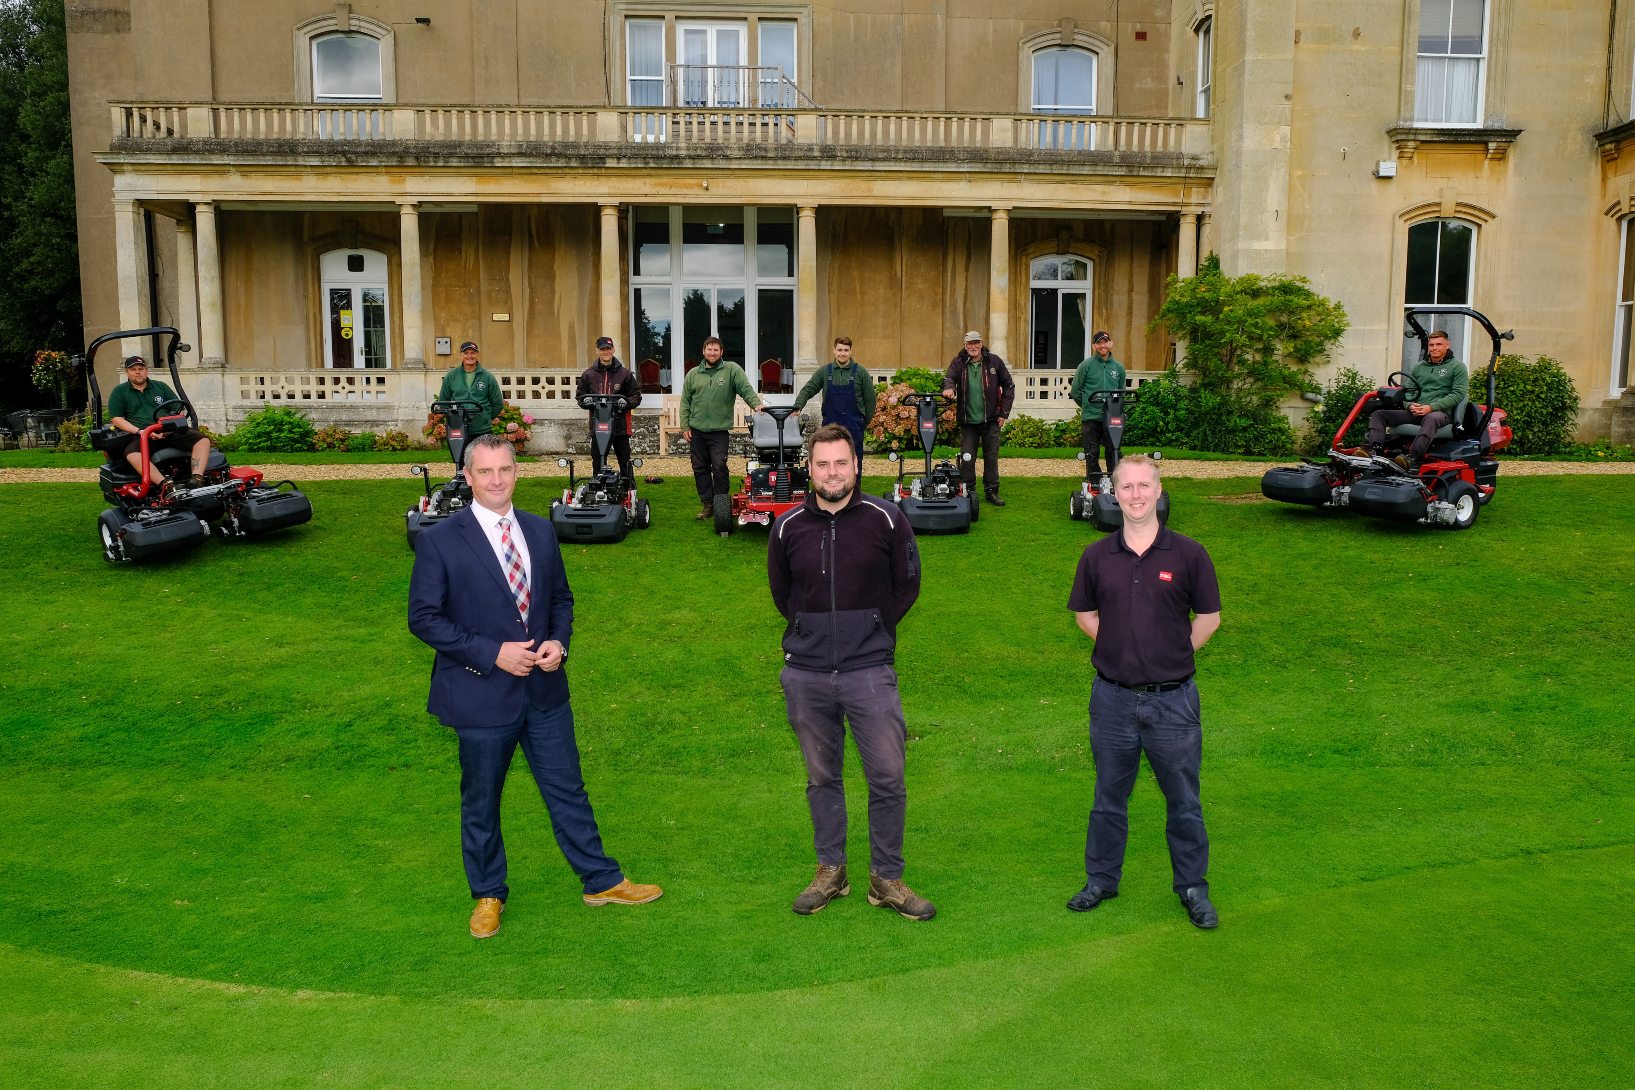 Toro Worcester Course manager Karl Williams, centre, with Reesink reps David Timms, left, and Daniel Tomberry, and the club’s Toro fleet and greenkeeping team in the background.